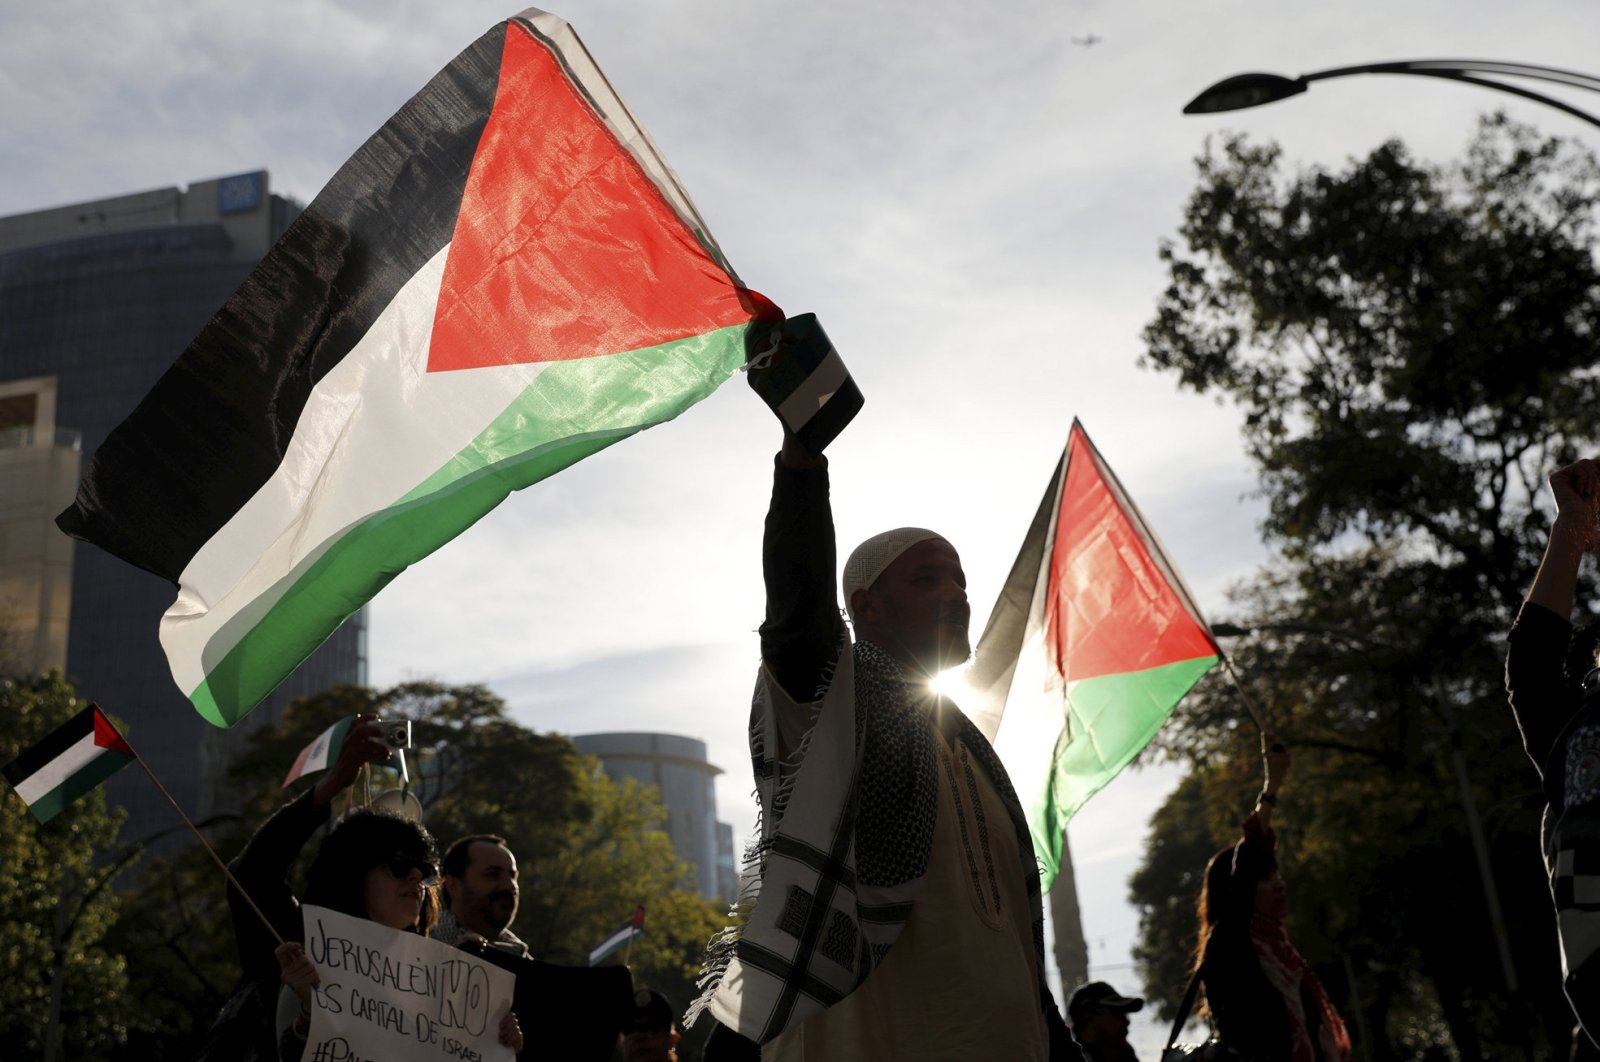 A man holds a Palestinian flag next to supporters of Palestine while demonstrating against U.S. President Donald Trump's recognition of Jerusalem as Israel's capital, outside the U.S embassy in Mexico City, Mexico, Dec. 25, 2017. (Reuters Photo)